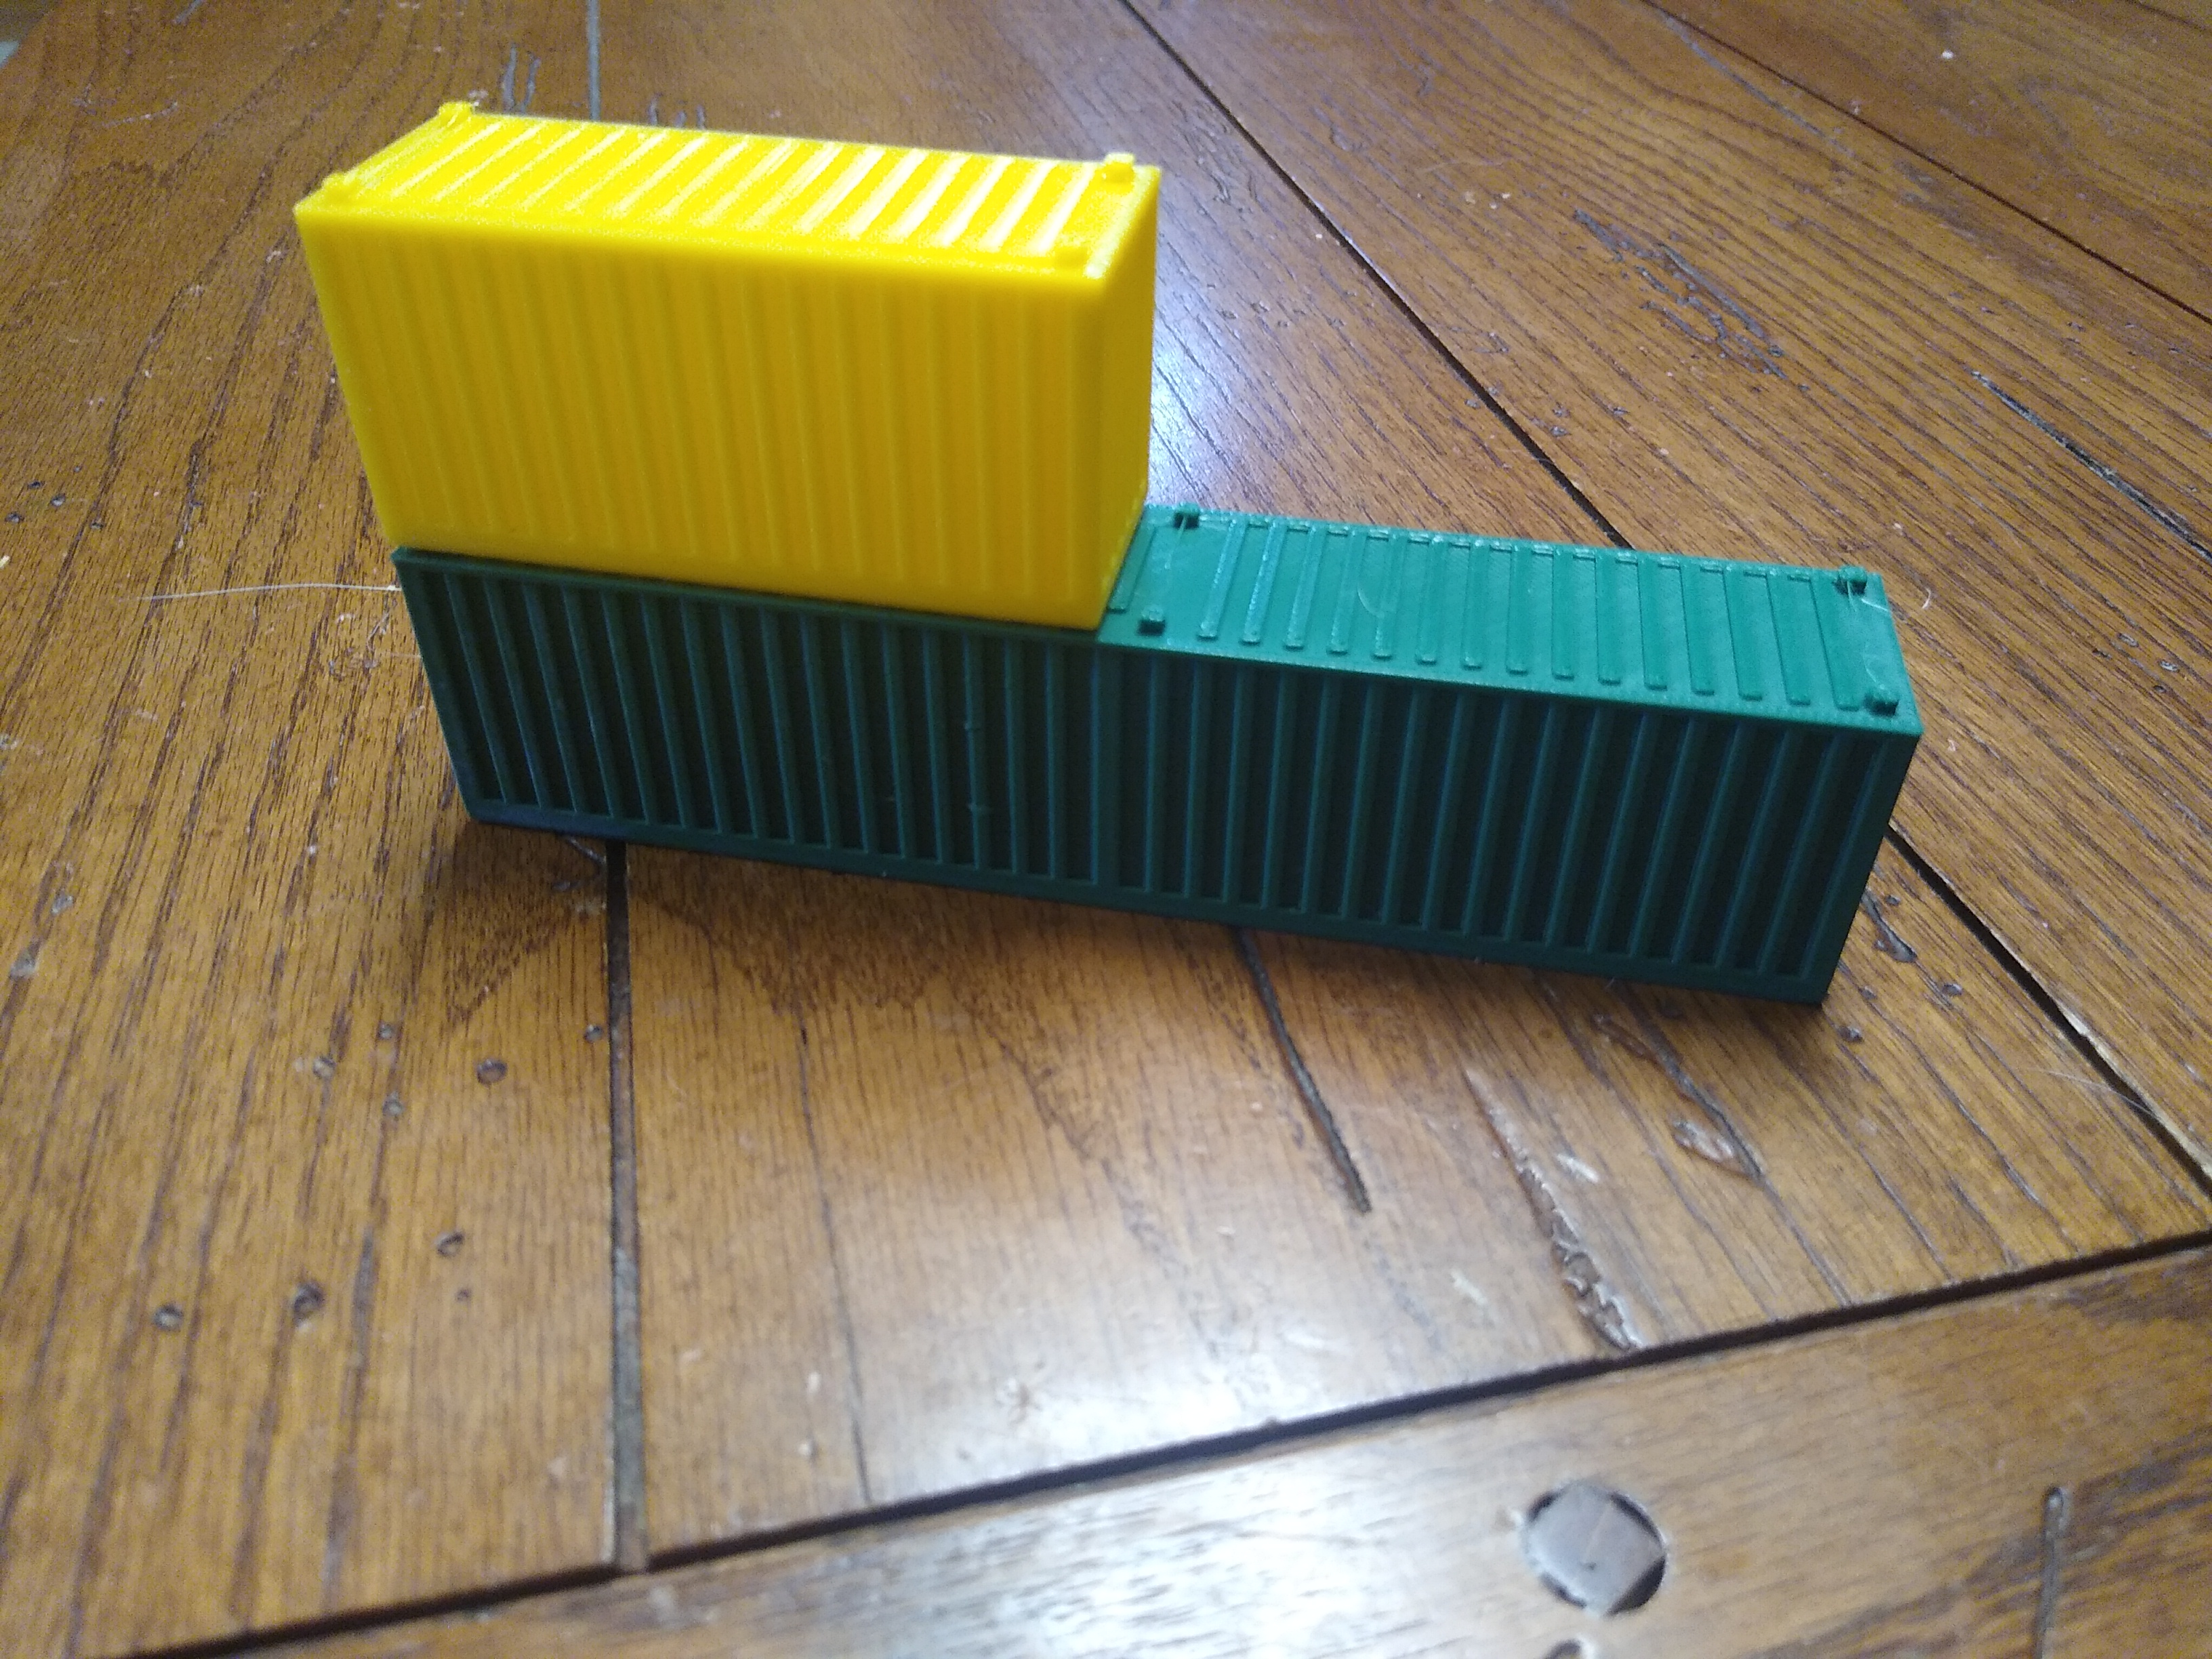 HO scale stackable storage containers